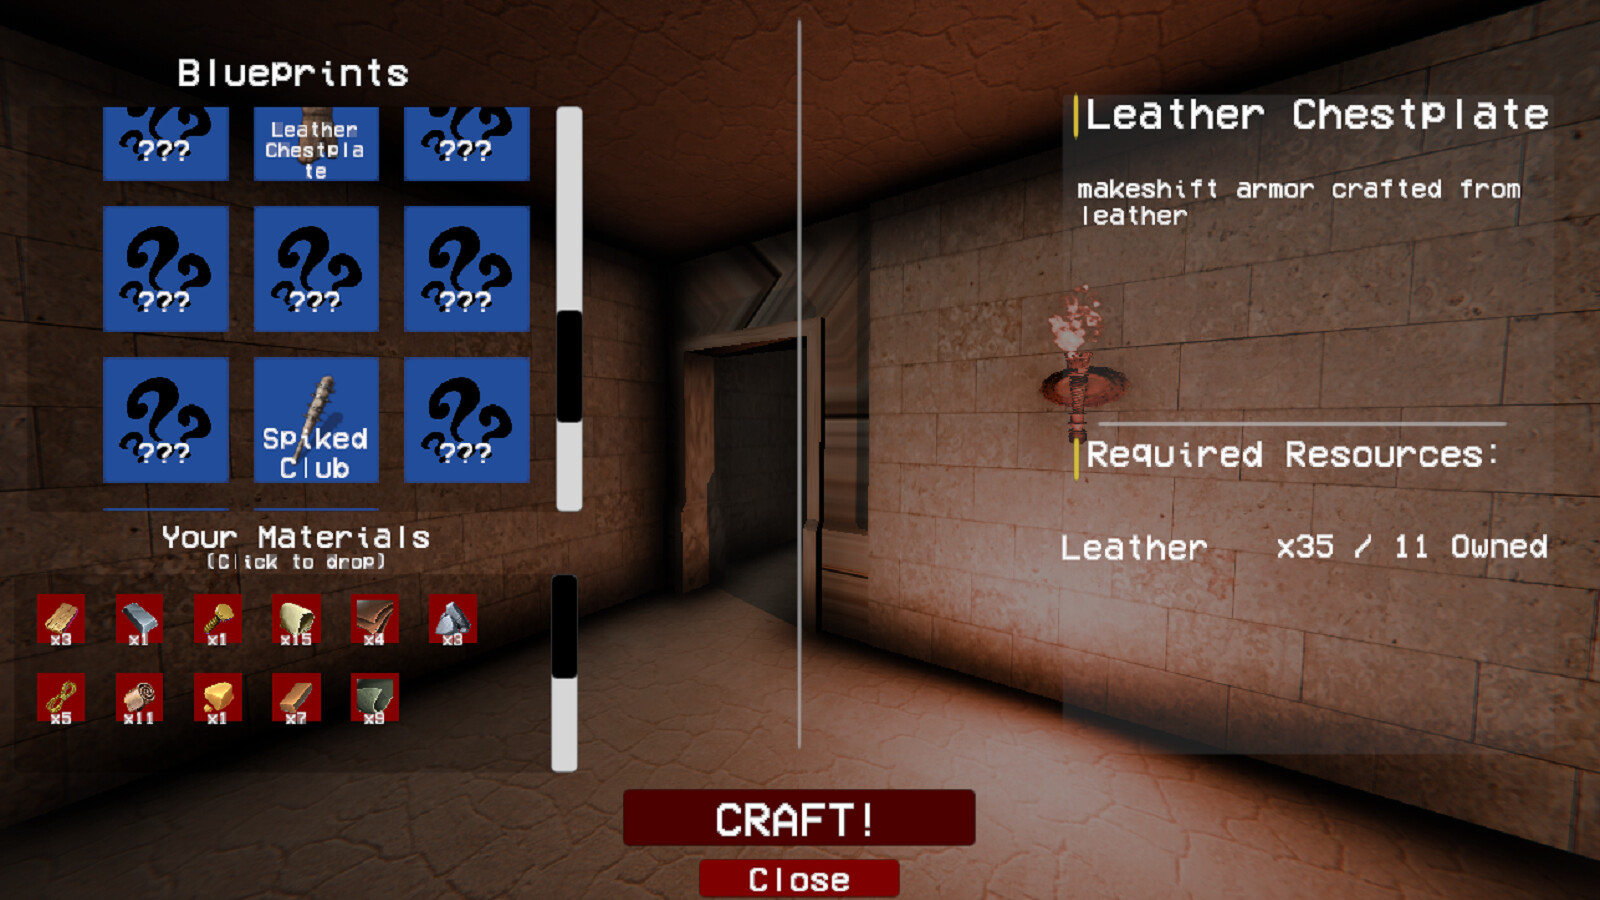 BEST BACKROOMS GAME IN ROBLOX IS BACKROOMS UNLIMITED.MORE THAN 15  LEVELS!Creator-  : r/ backrooms